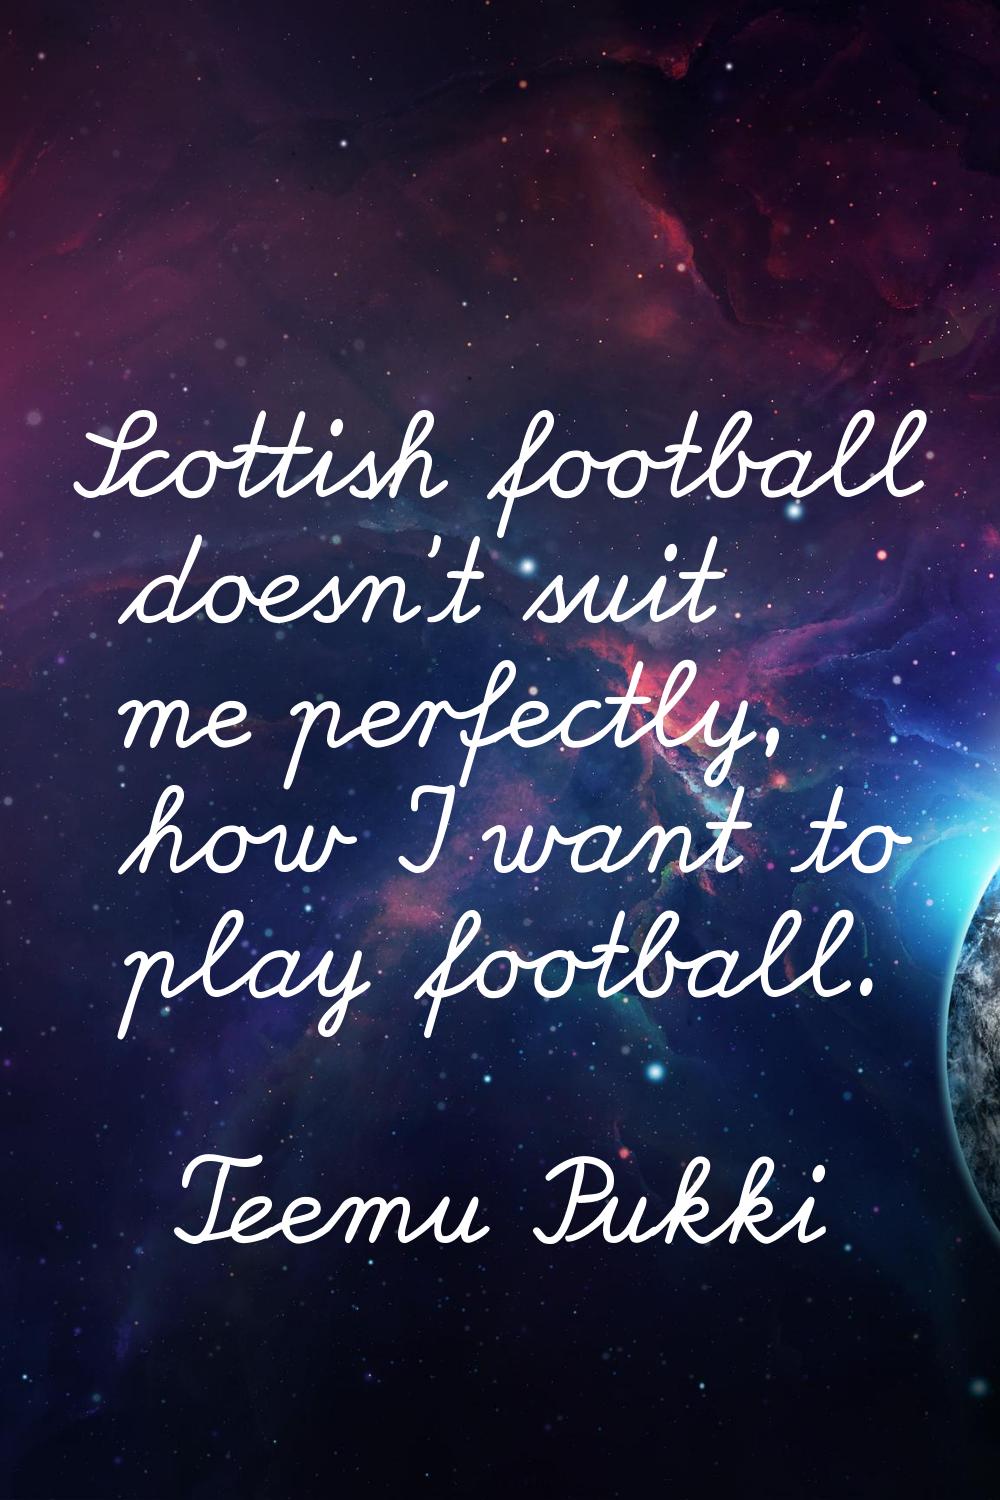 Scottish football doesn't suit me perfectly, how I want to play football.